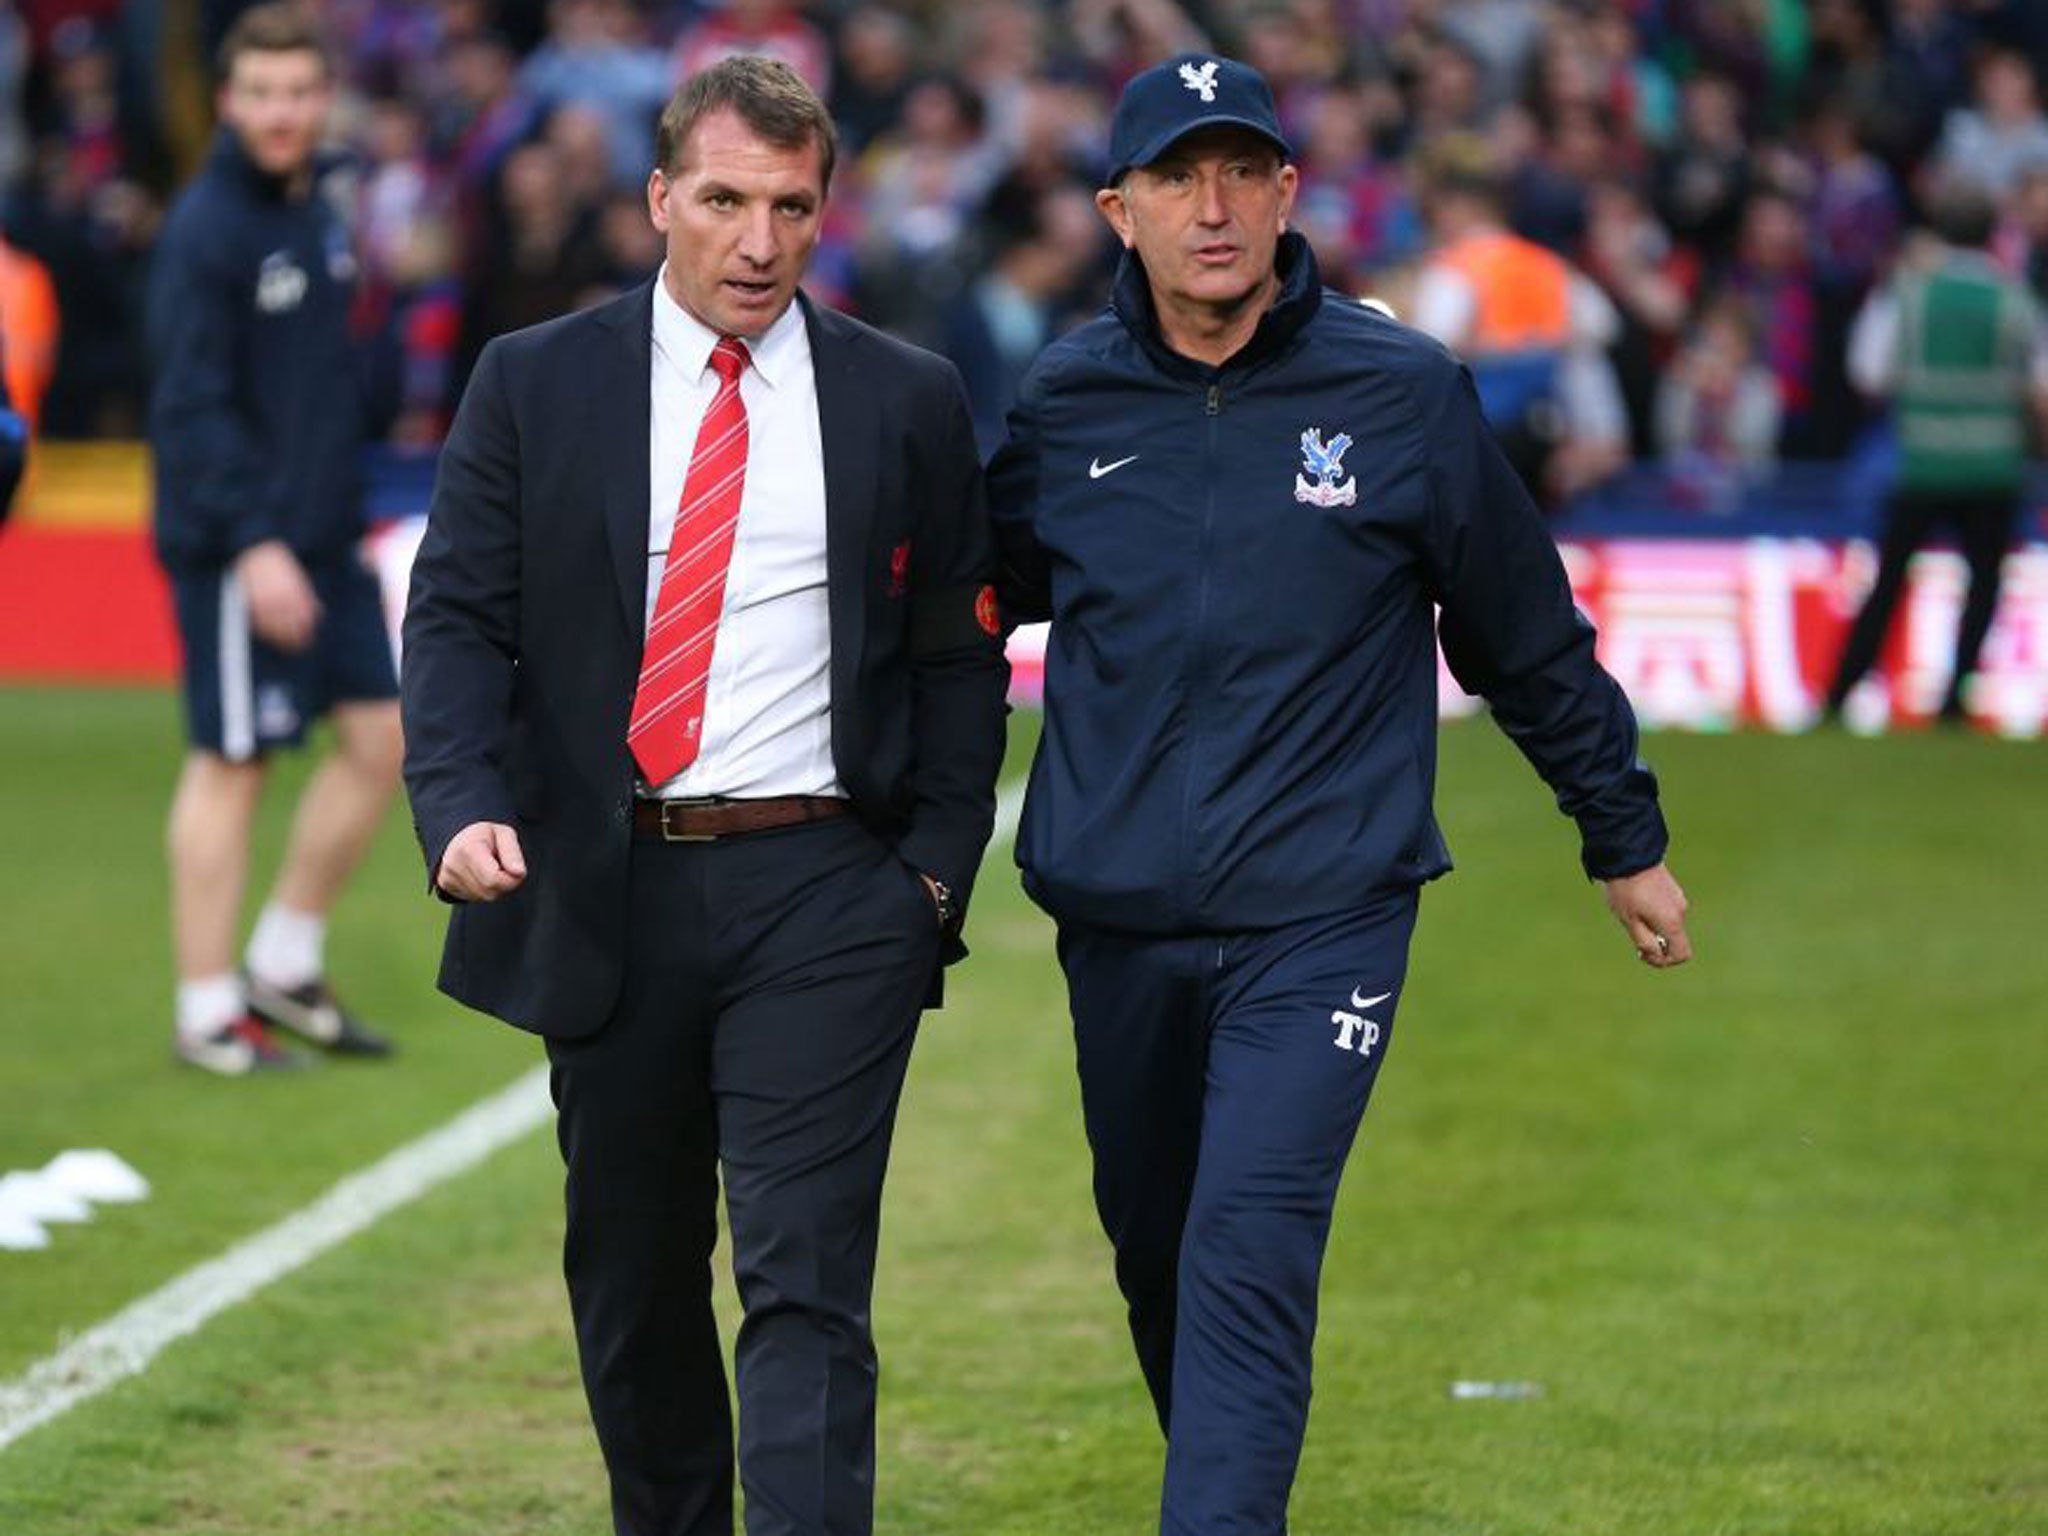 Palace manager Tony Pulis, right, alongside Brendan Rodgers before the start of last night’s match at Selhurst Park